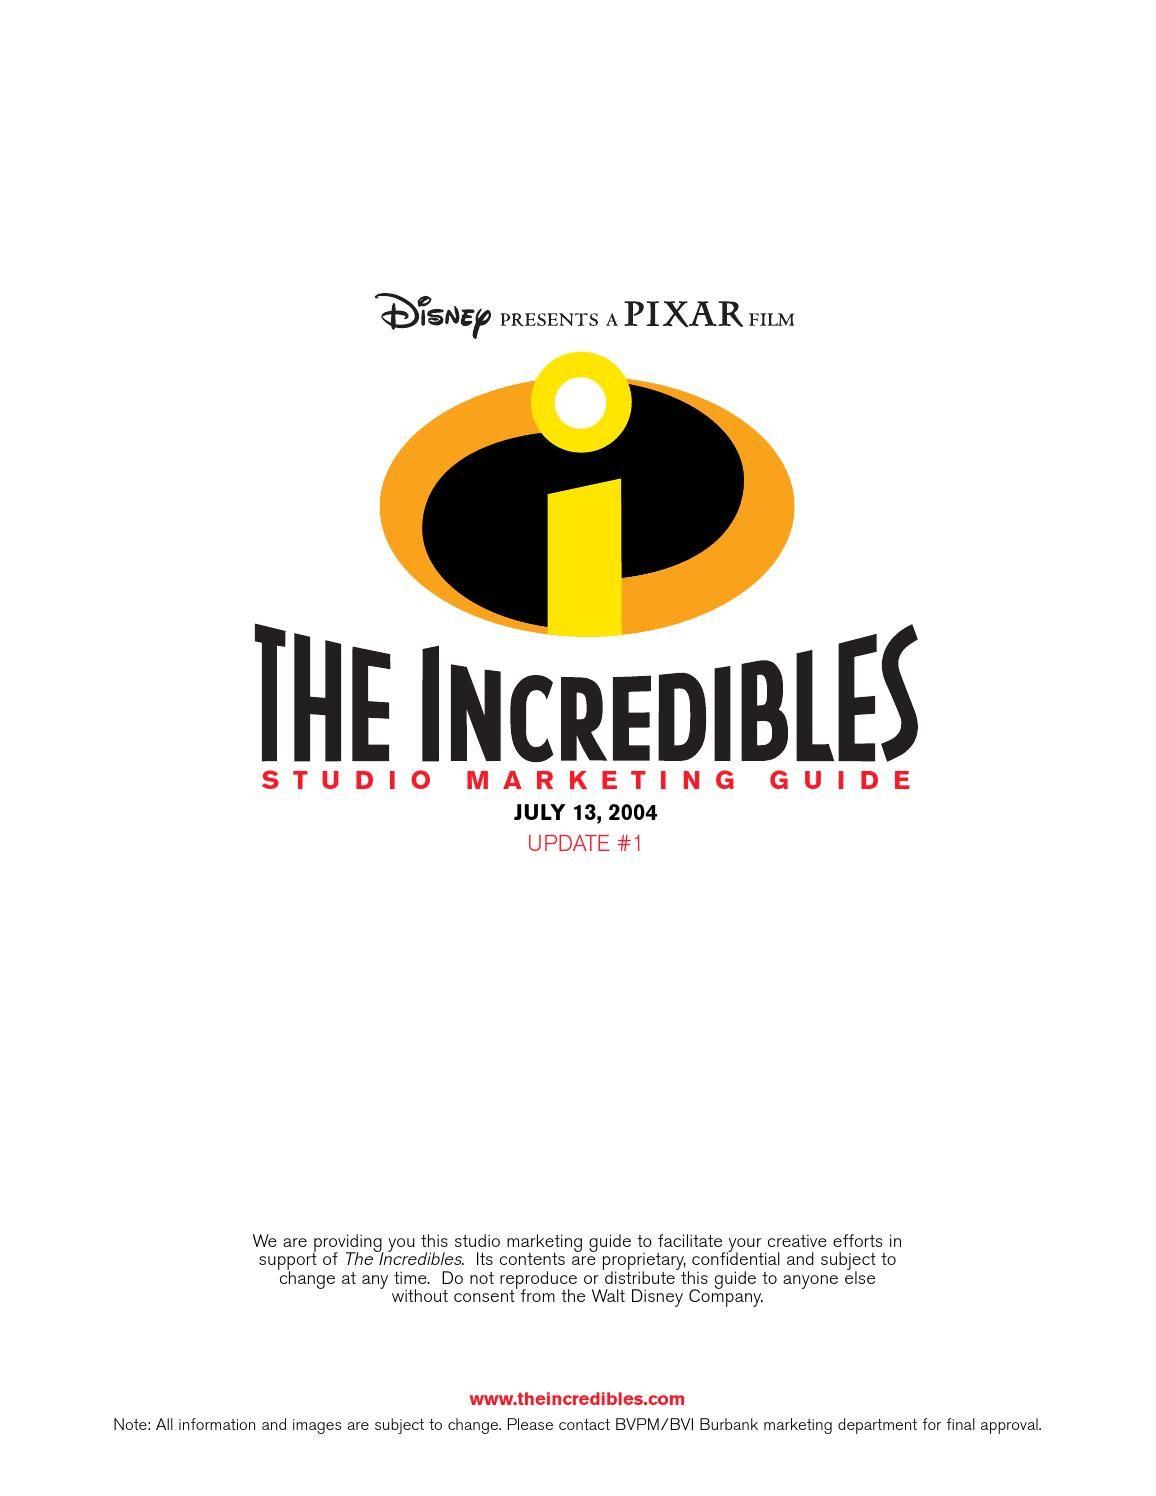 Disney Presents Logo - Guidelines: The Incredibles